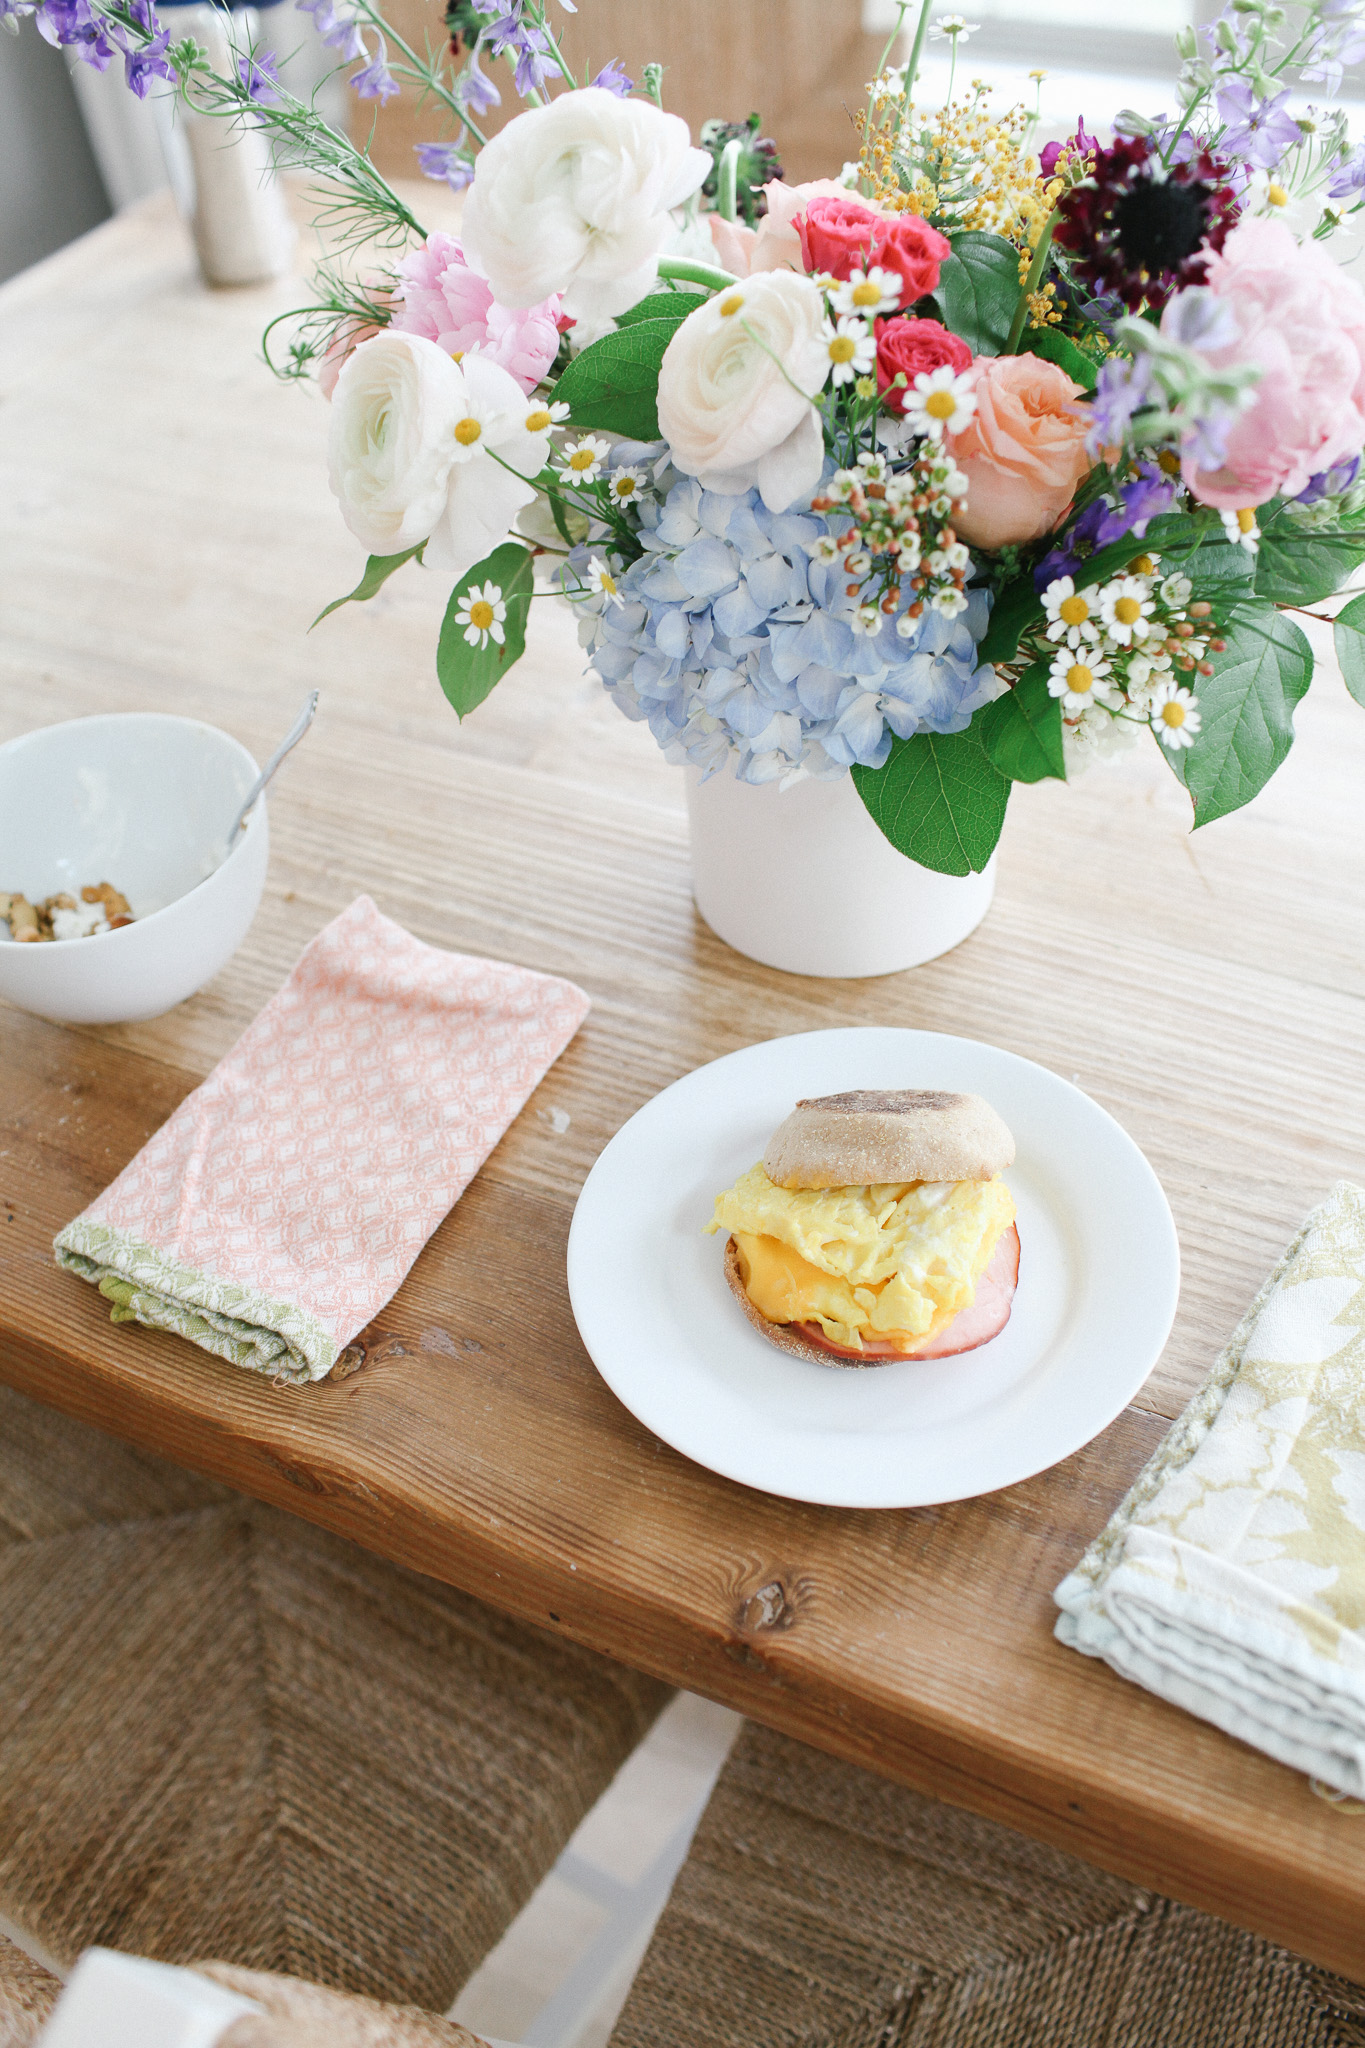 breakfast sandwiches and flowers on dining table with cloth napkins